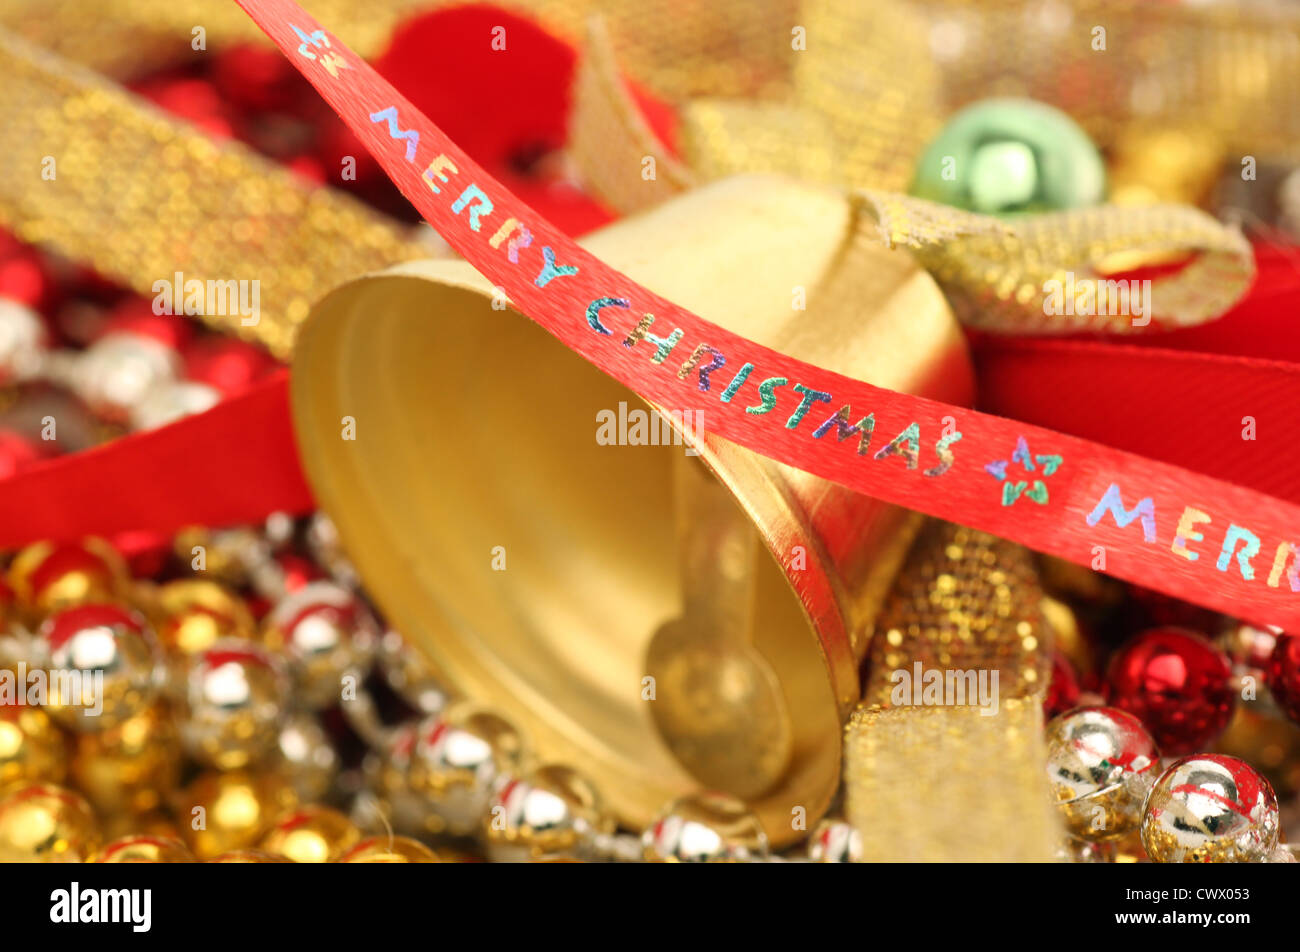 Christmas Tree decorations Banque D'Images